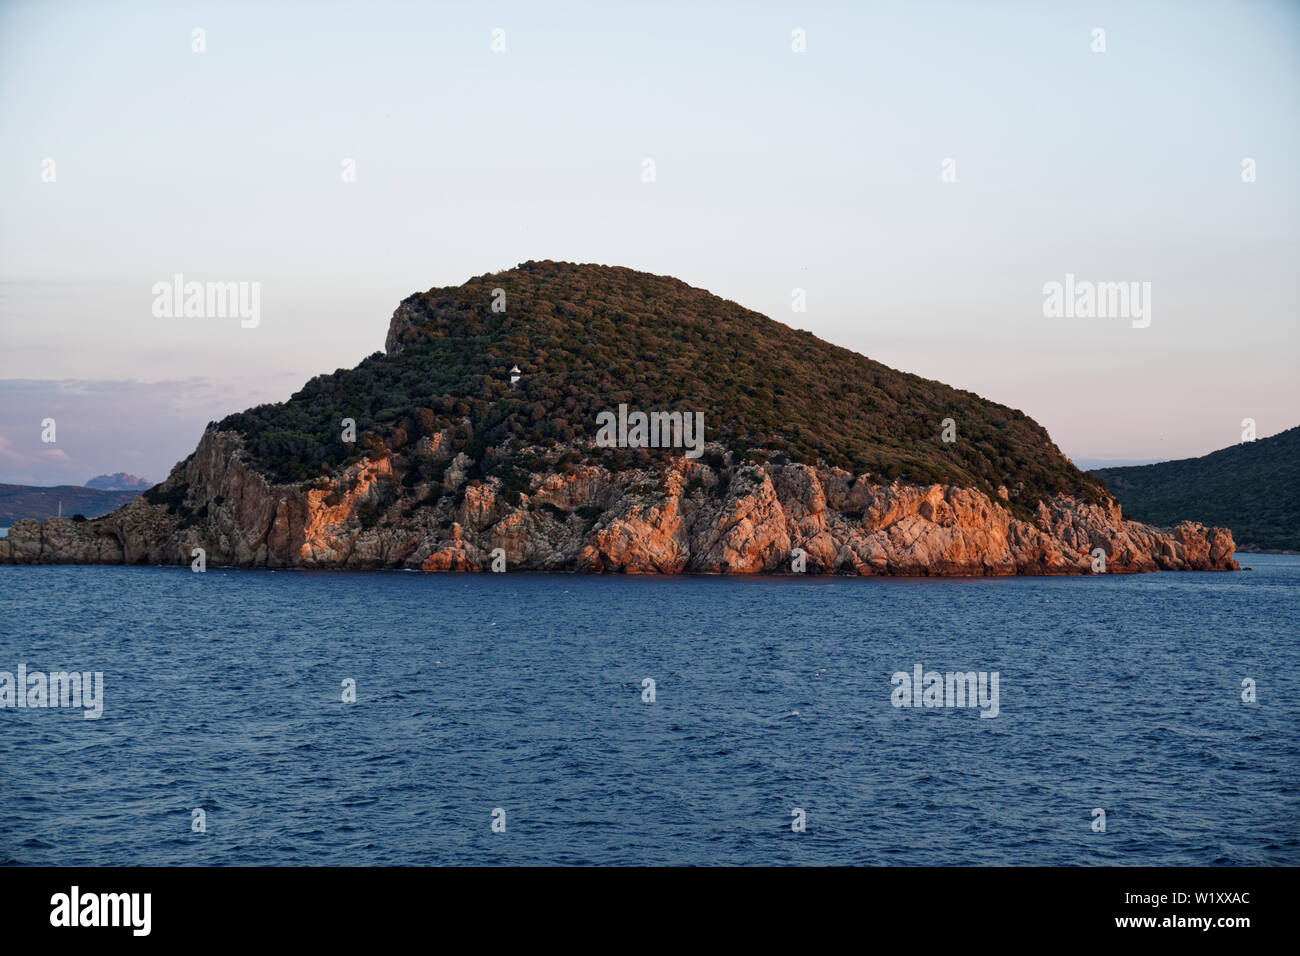 Corsica Ferries High Resolution Stock Photography and Images - Alamy